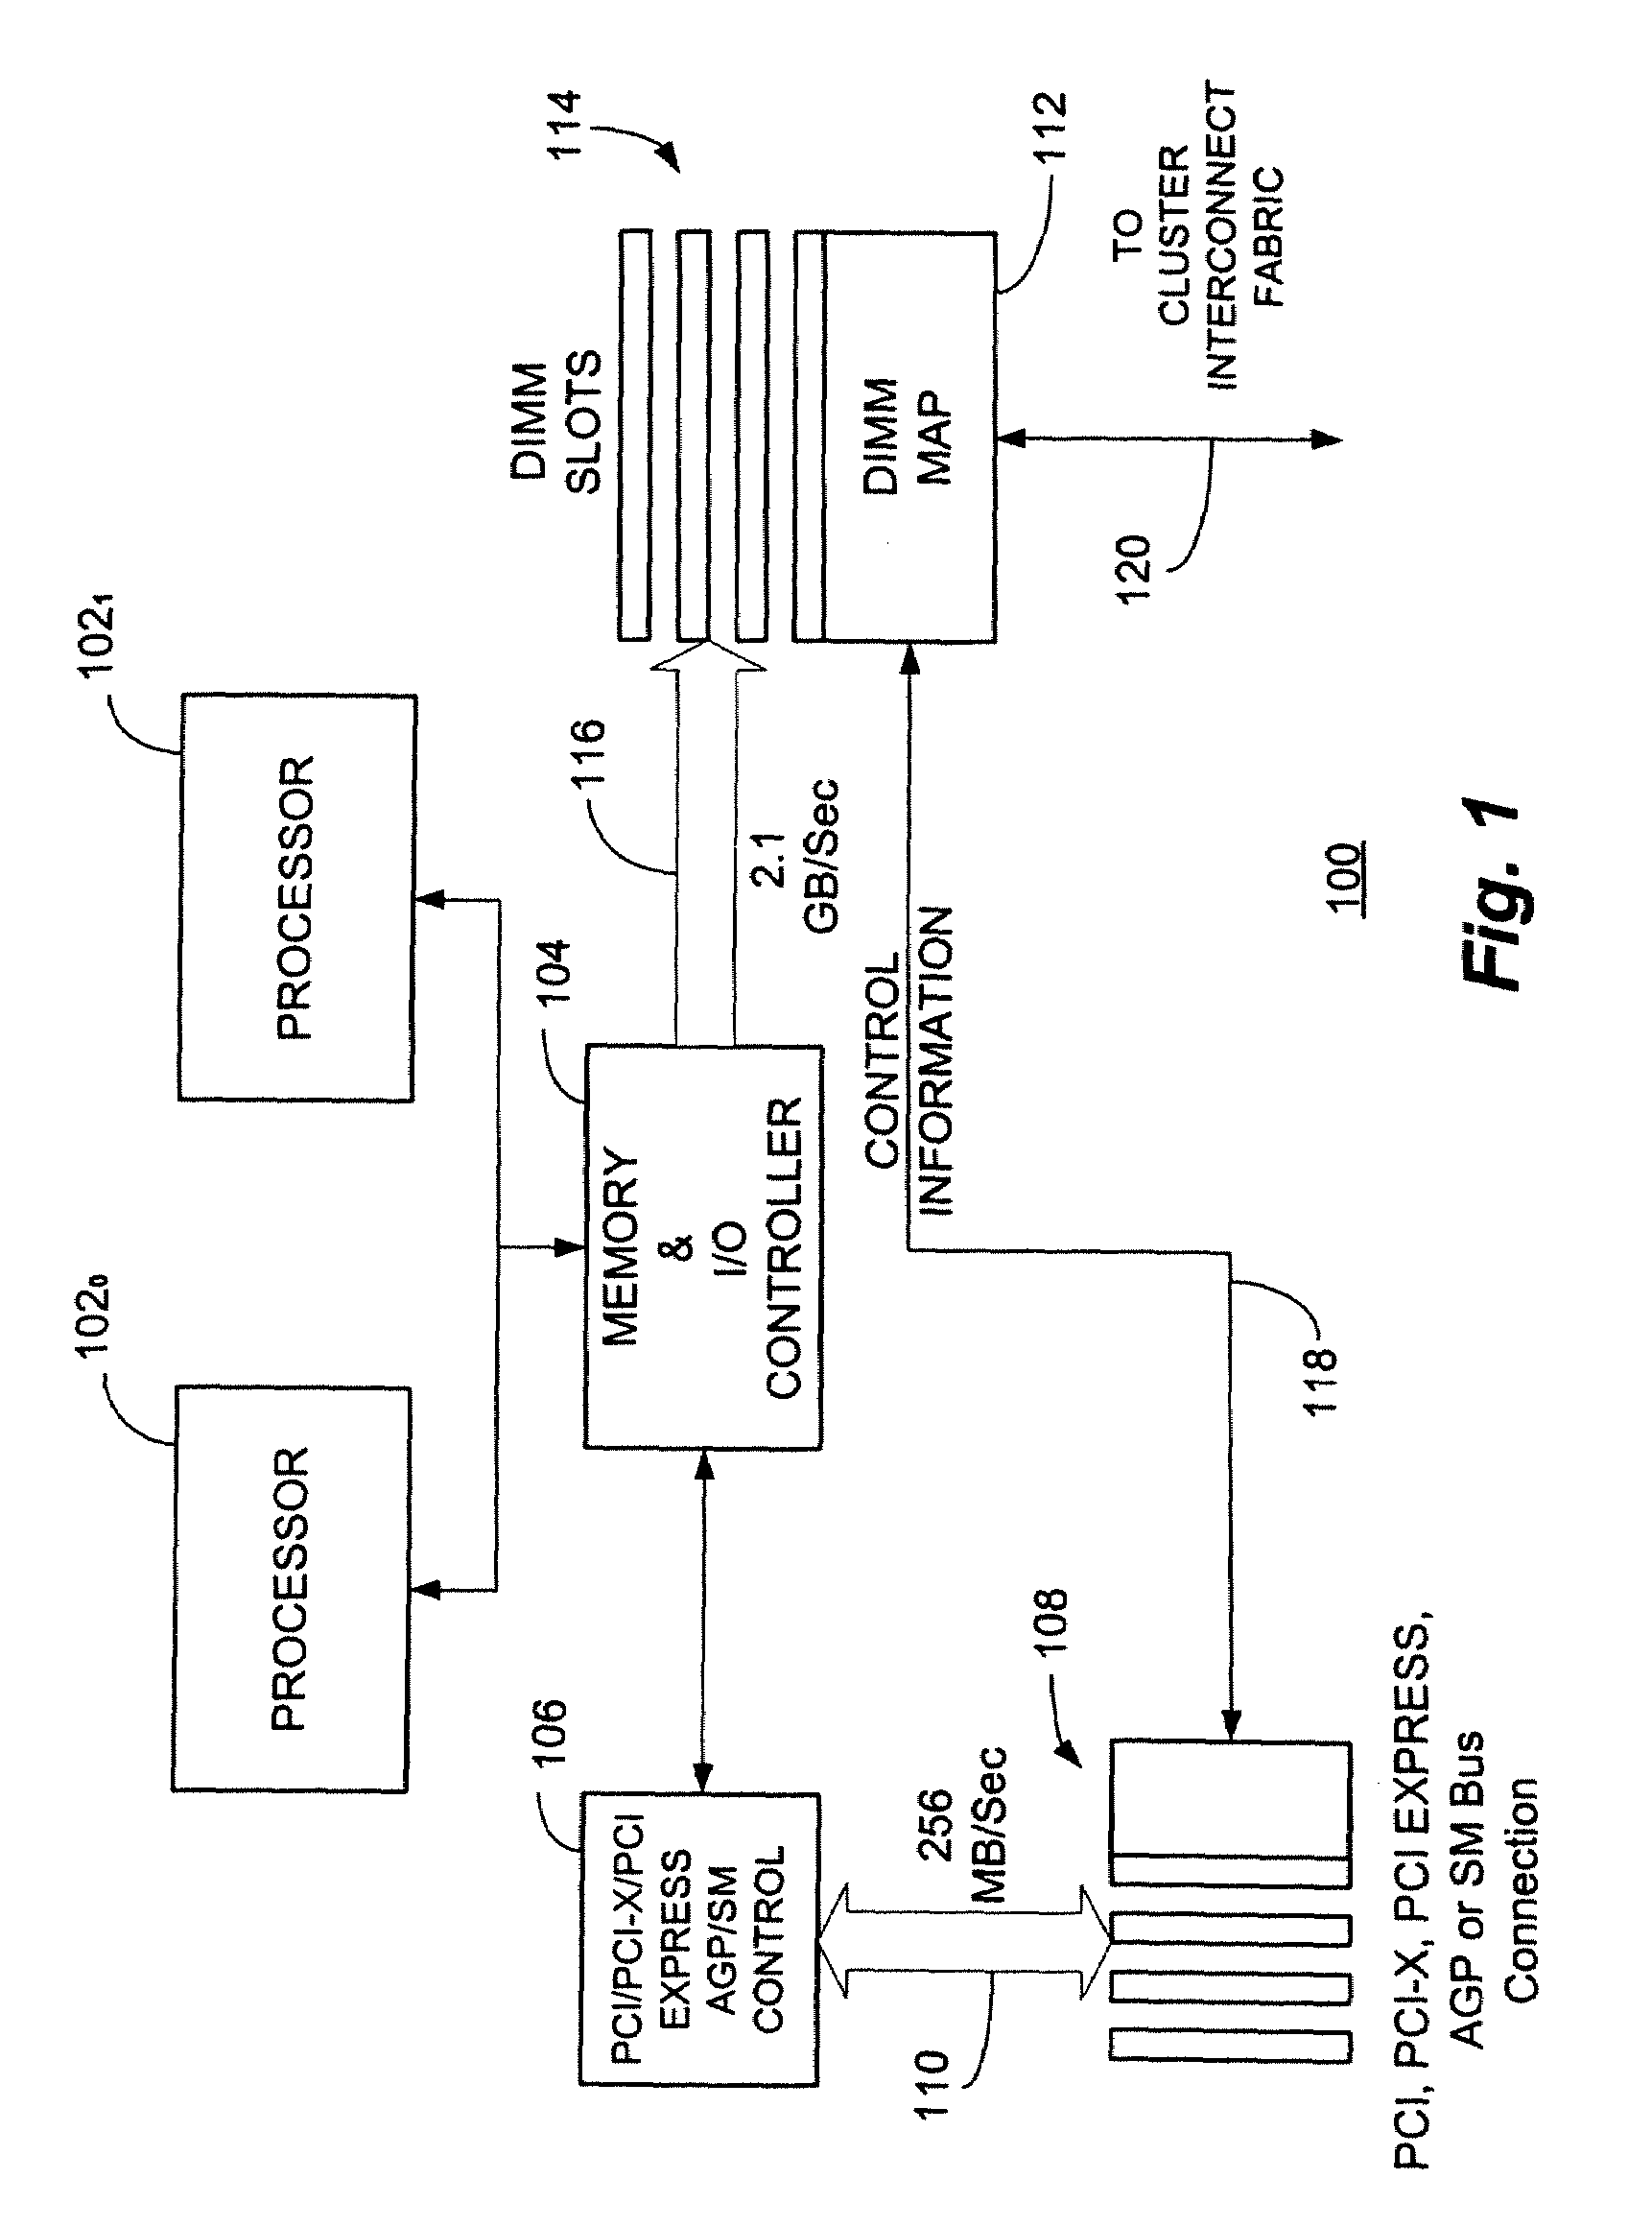 Switch/network adapter port incorporating shared memory resources selectively accessible by a direct execution logic element and one or more dense logic devices in a fully buffered dual in-line memory module format (FB-DIMM)